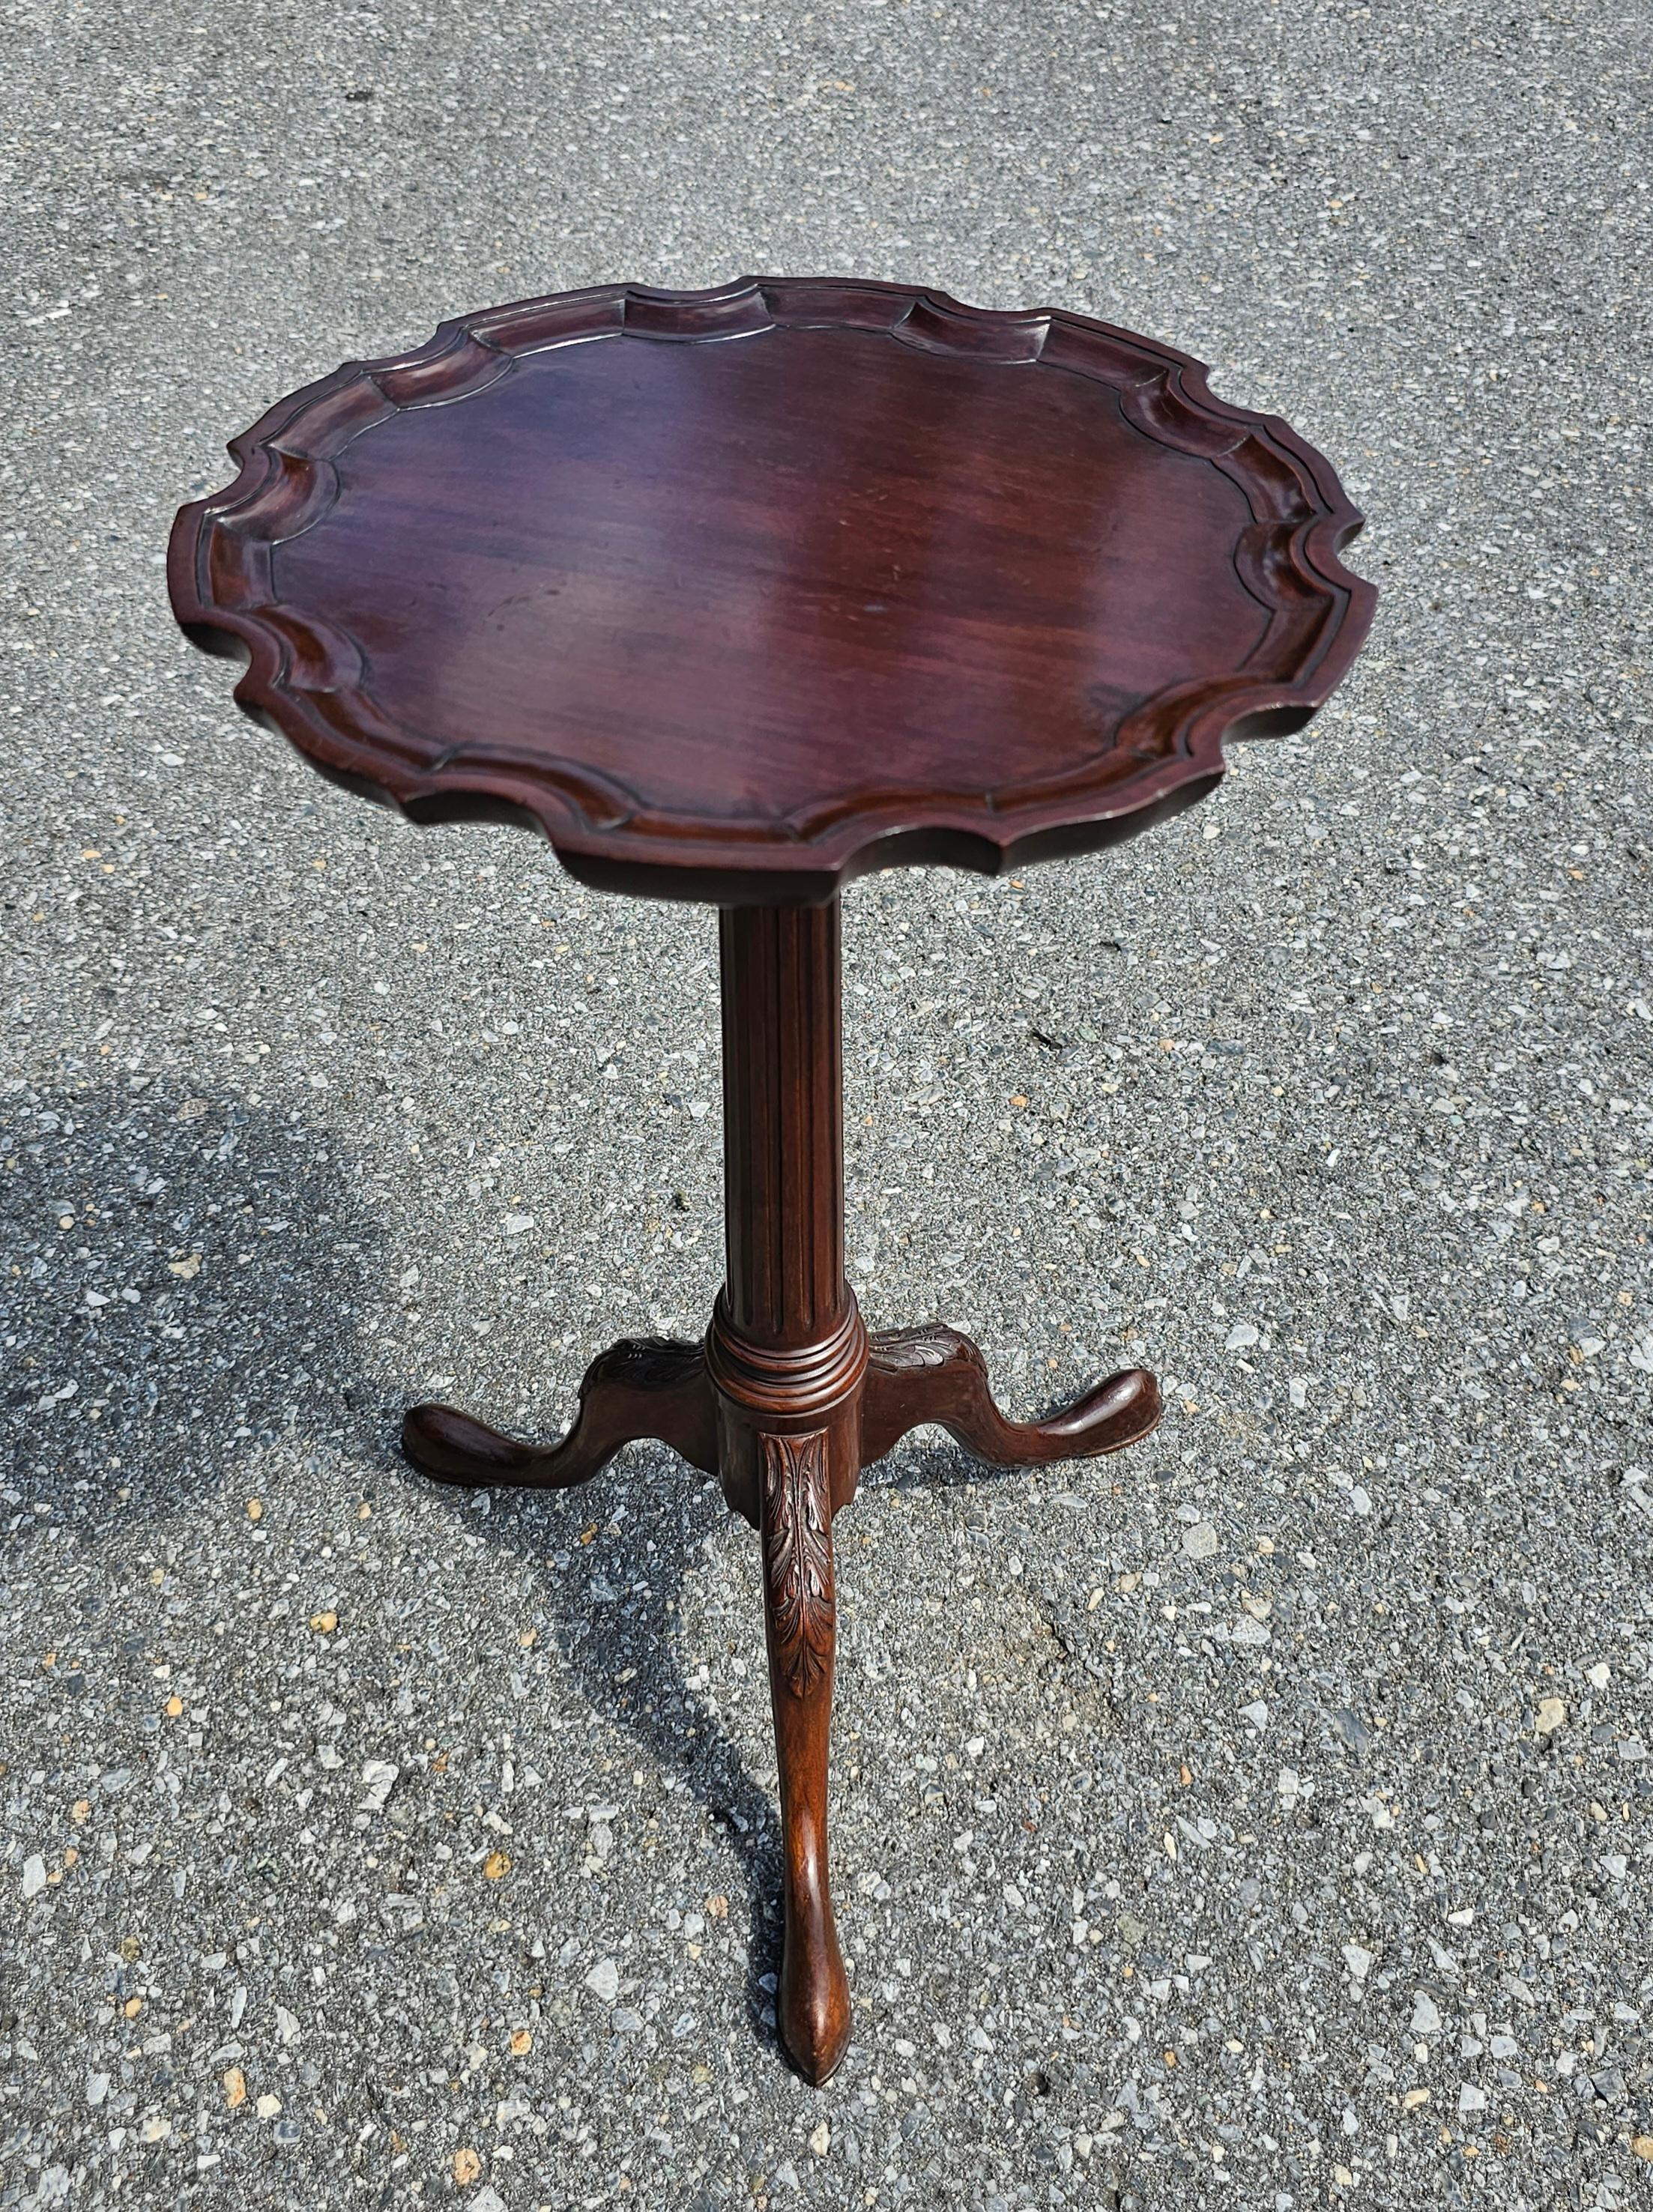 Early 20th Century George III Style Mahogany Galleried Refinished Candle Stand In Good Condition For Sale In Germantown, MD